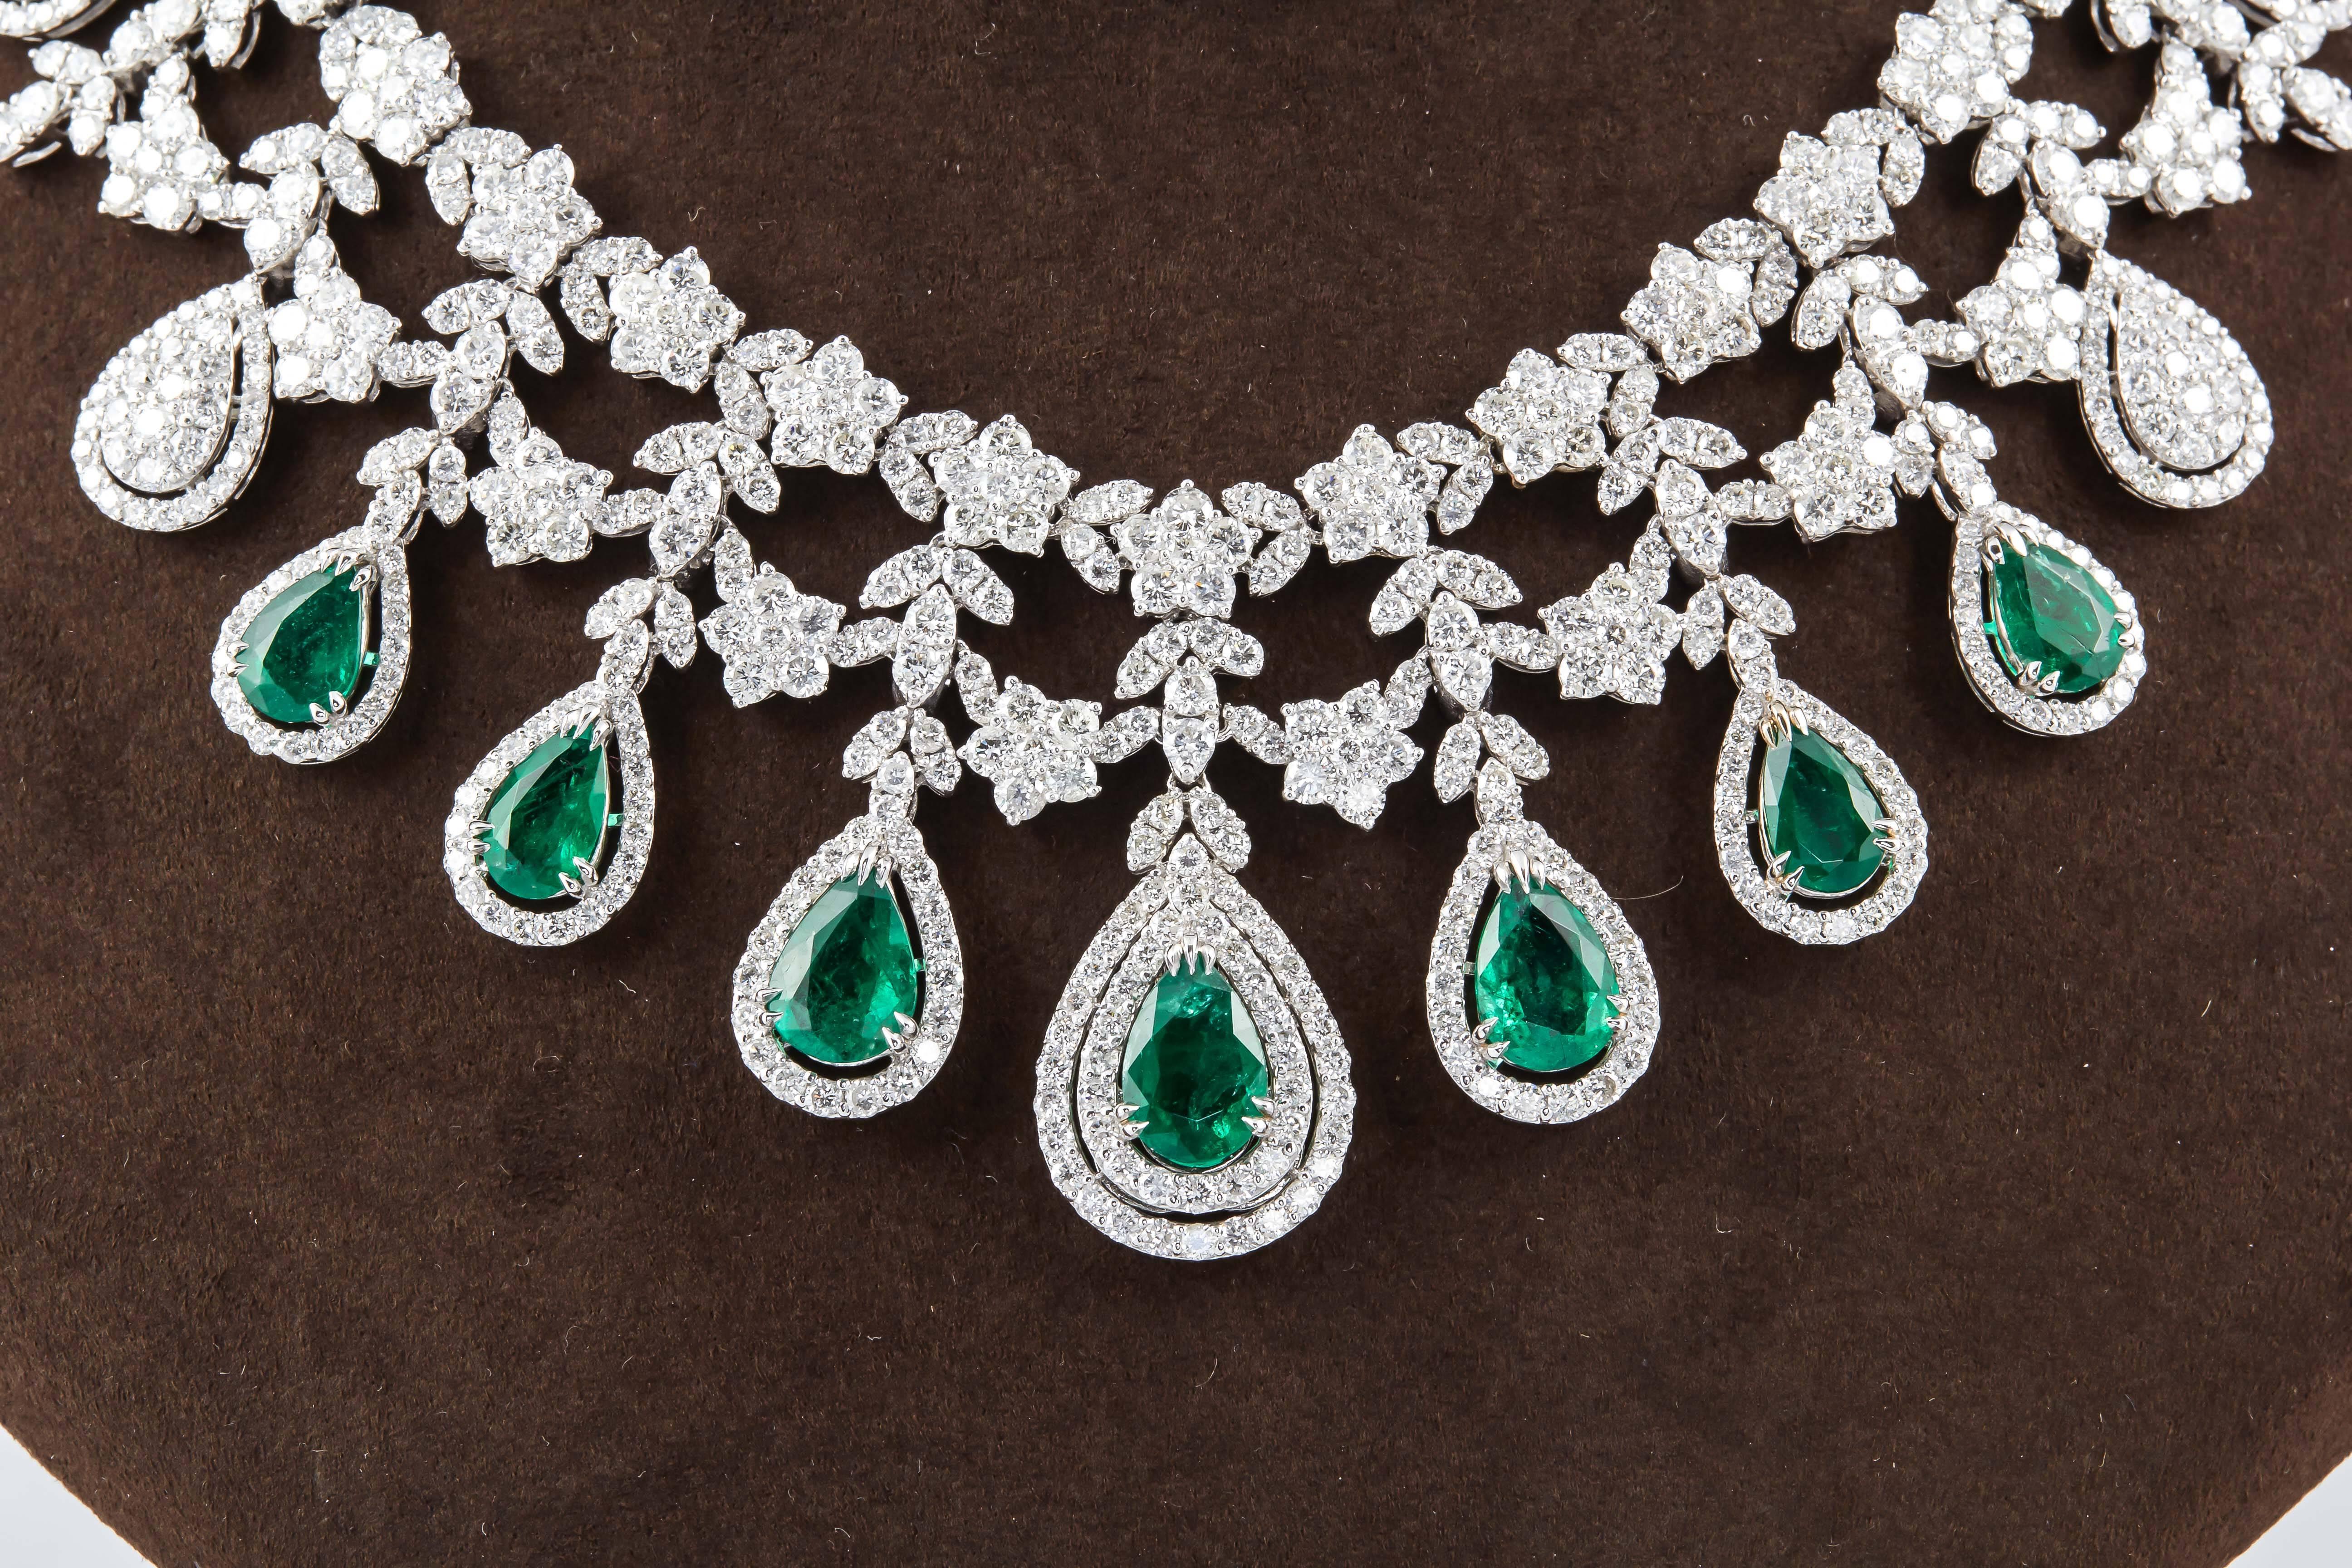 

A beautiful emerald and diamond necklace with an very important look. 

12.05 carats of fine green emeralds. 28.04 carats of round brilliant cut diamonds. 

18k white gold 

The design resembles a tiara. 

Approximately 16.5 inch length